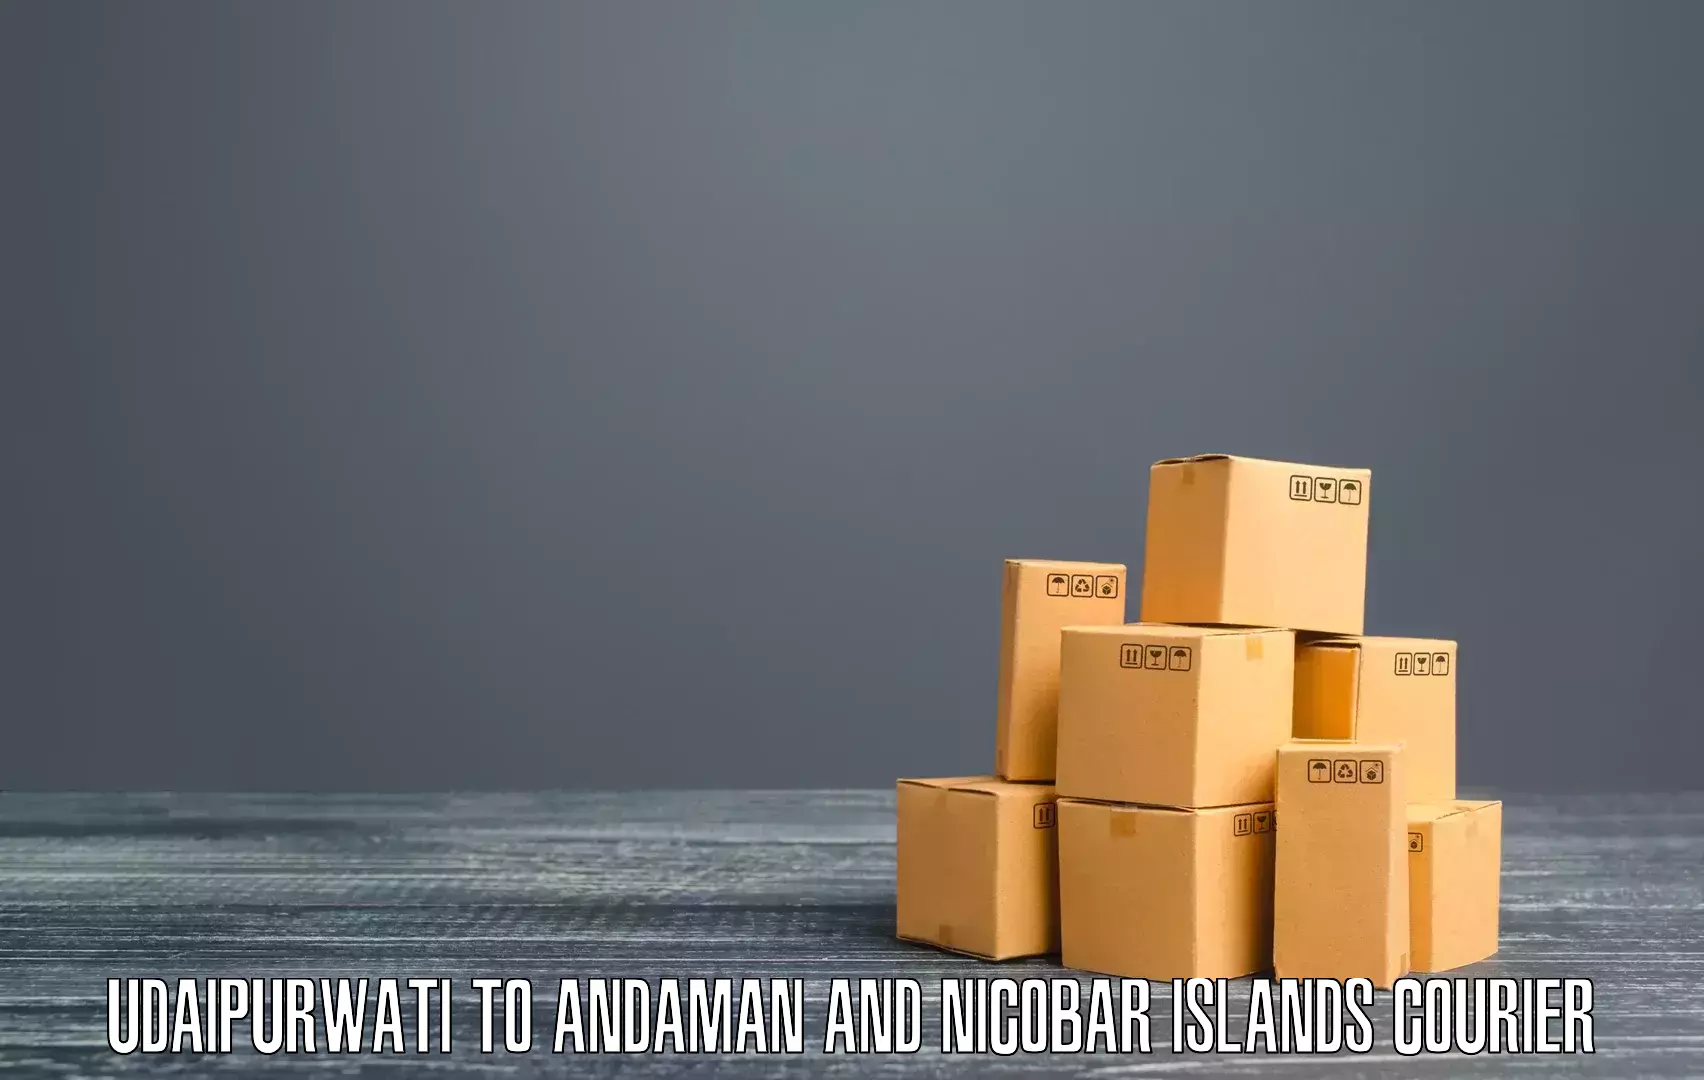 Customer-centric shipping Udaipurwati to North And Middle Andaman